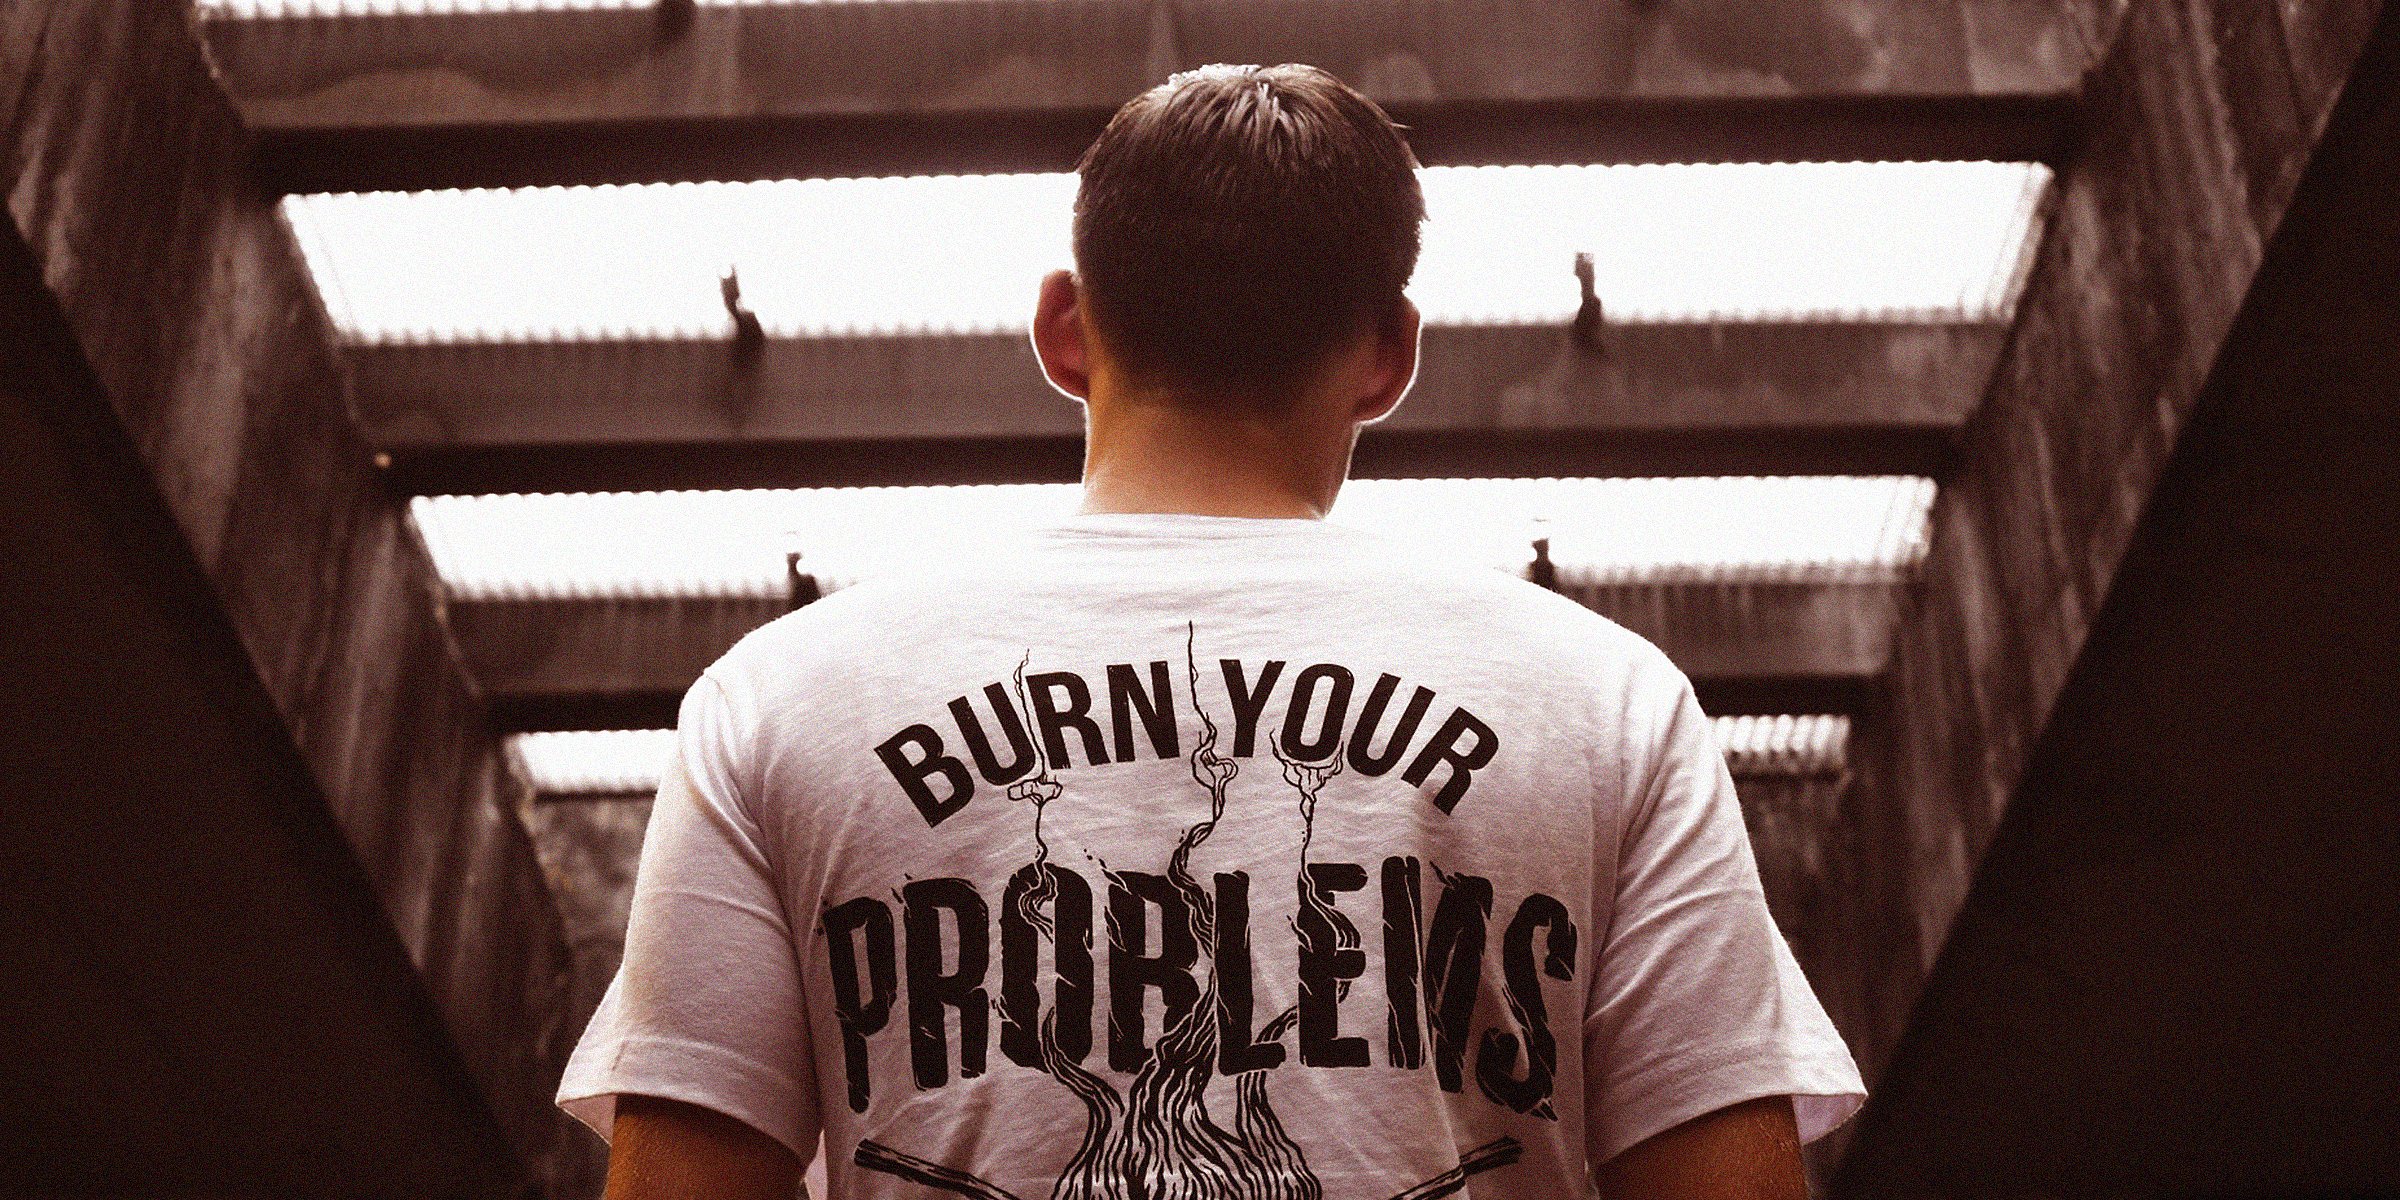 A man facing backward with a t-shirt that reads 'Burn Your Problems' | Image: AmoDays